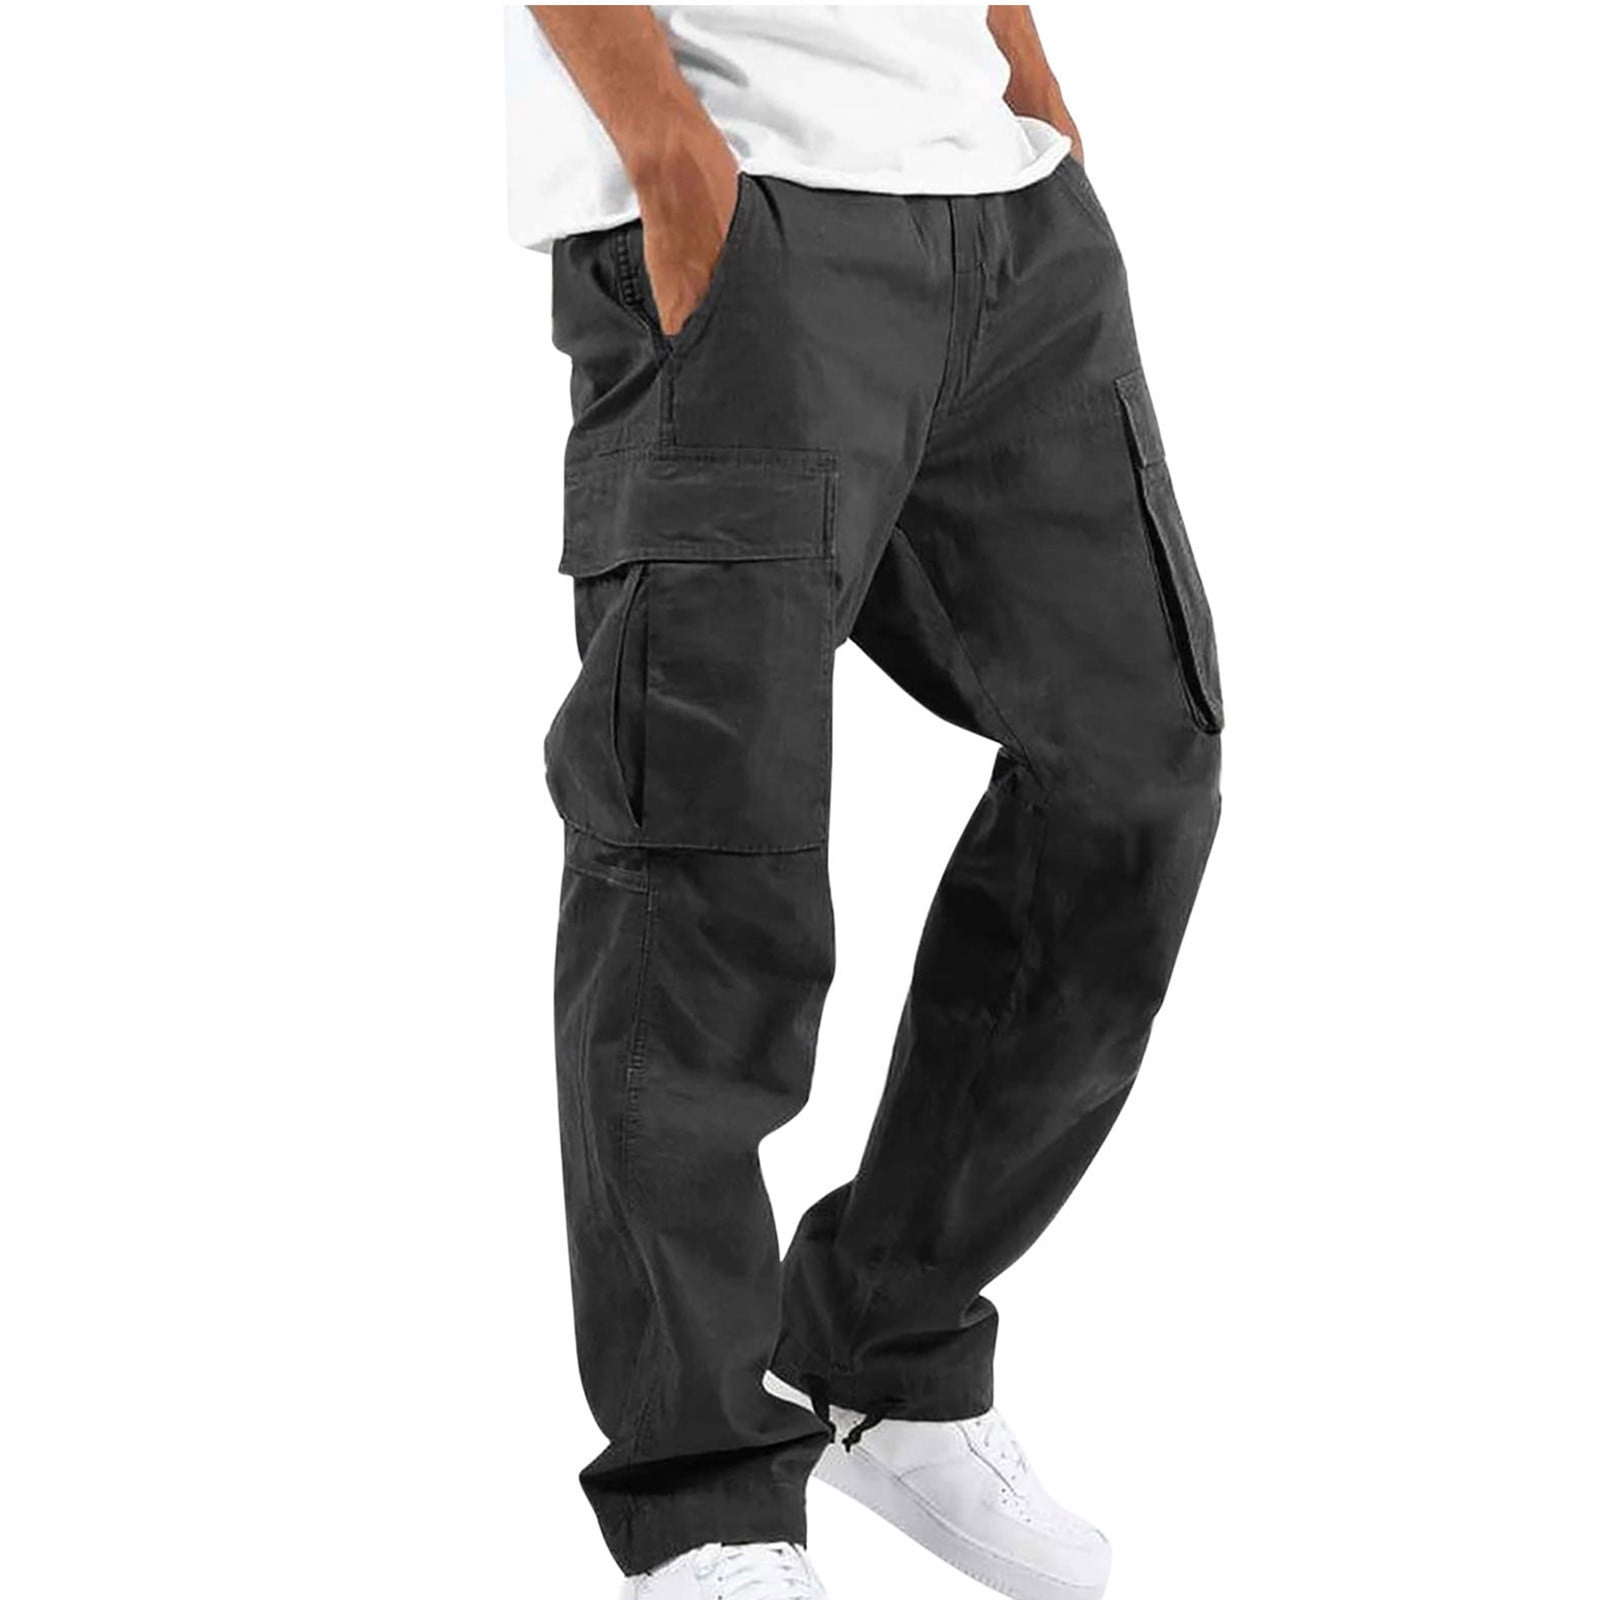 symoid Baggy Cargo Pants- Solid Casual Multiple Pockets Outdoor Straight  Type Fitness Pants Cargo Pants Trousers Black